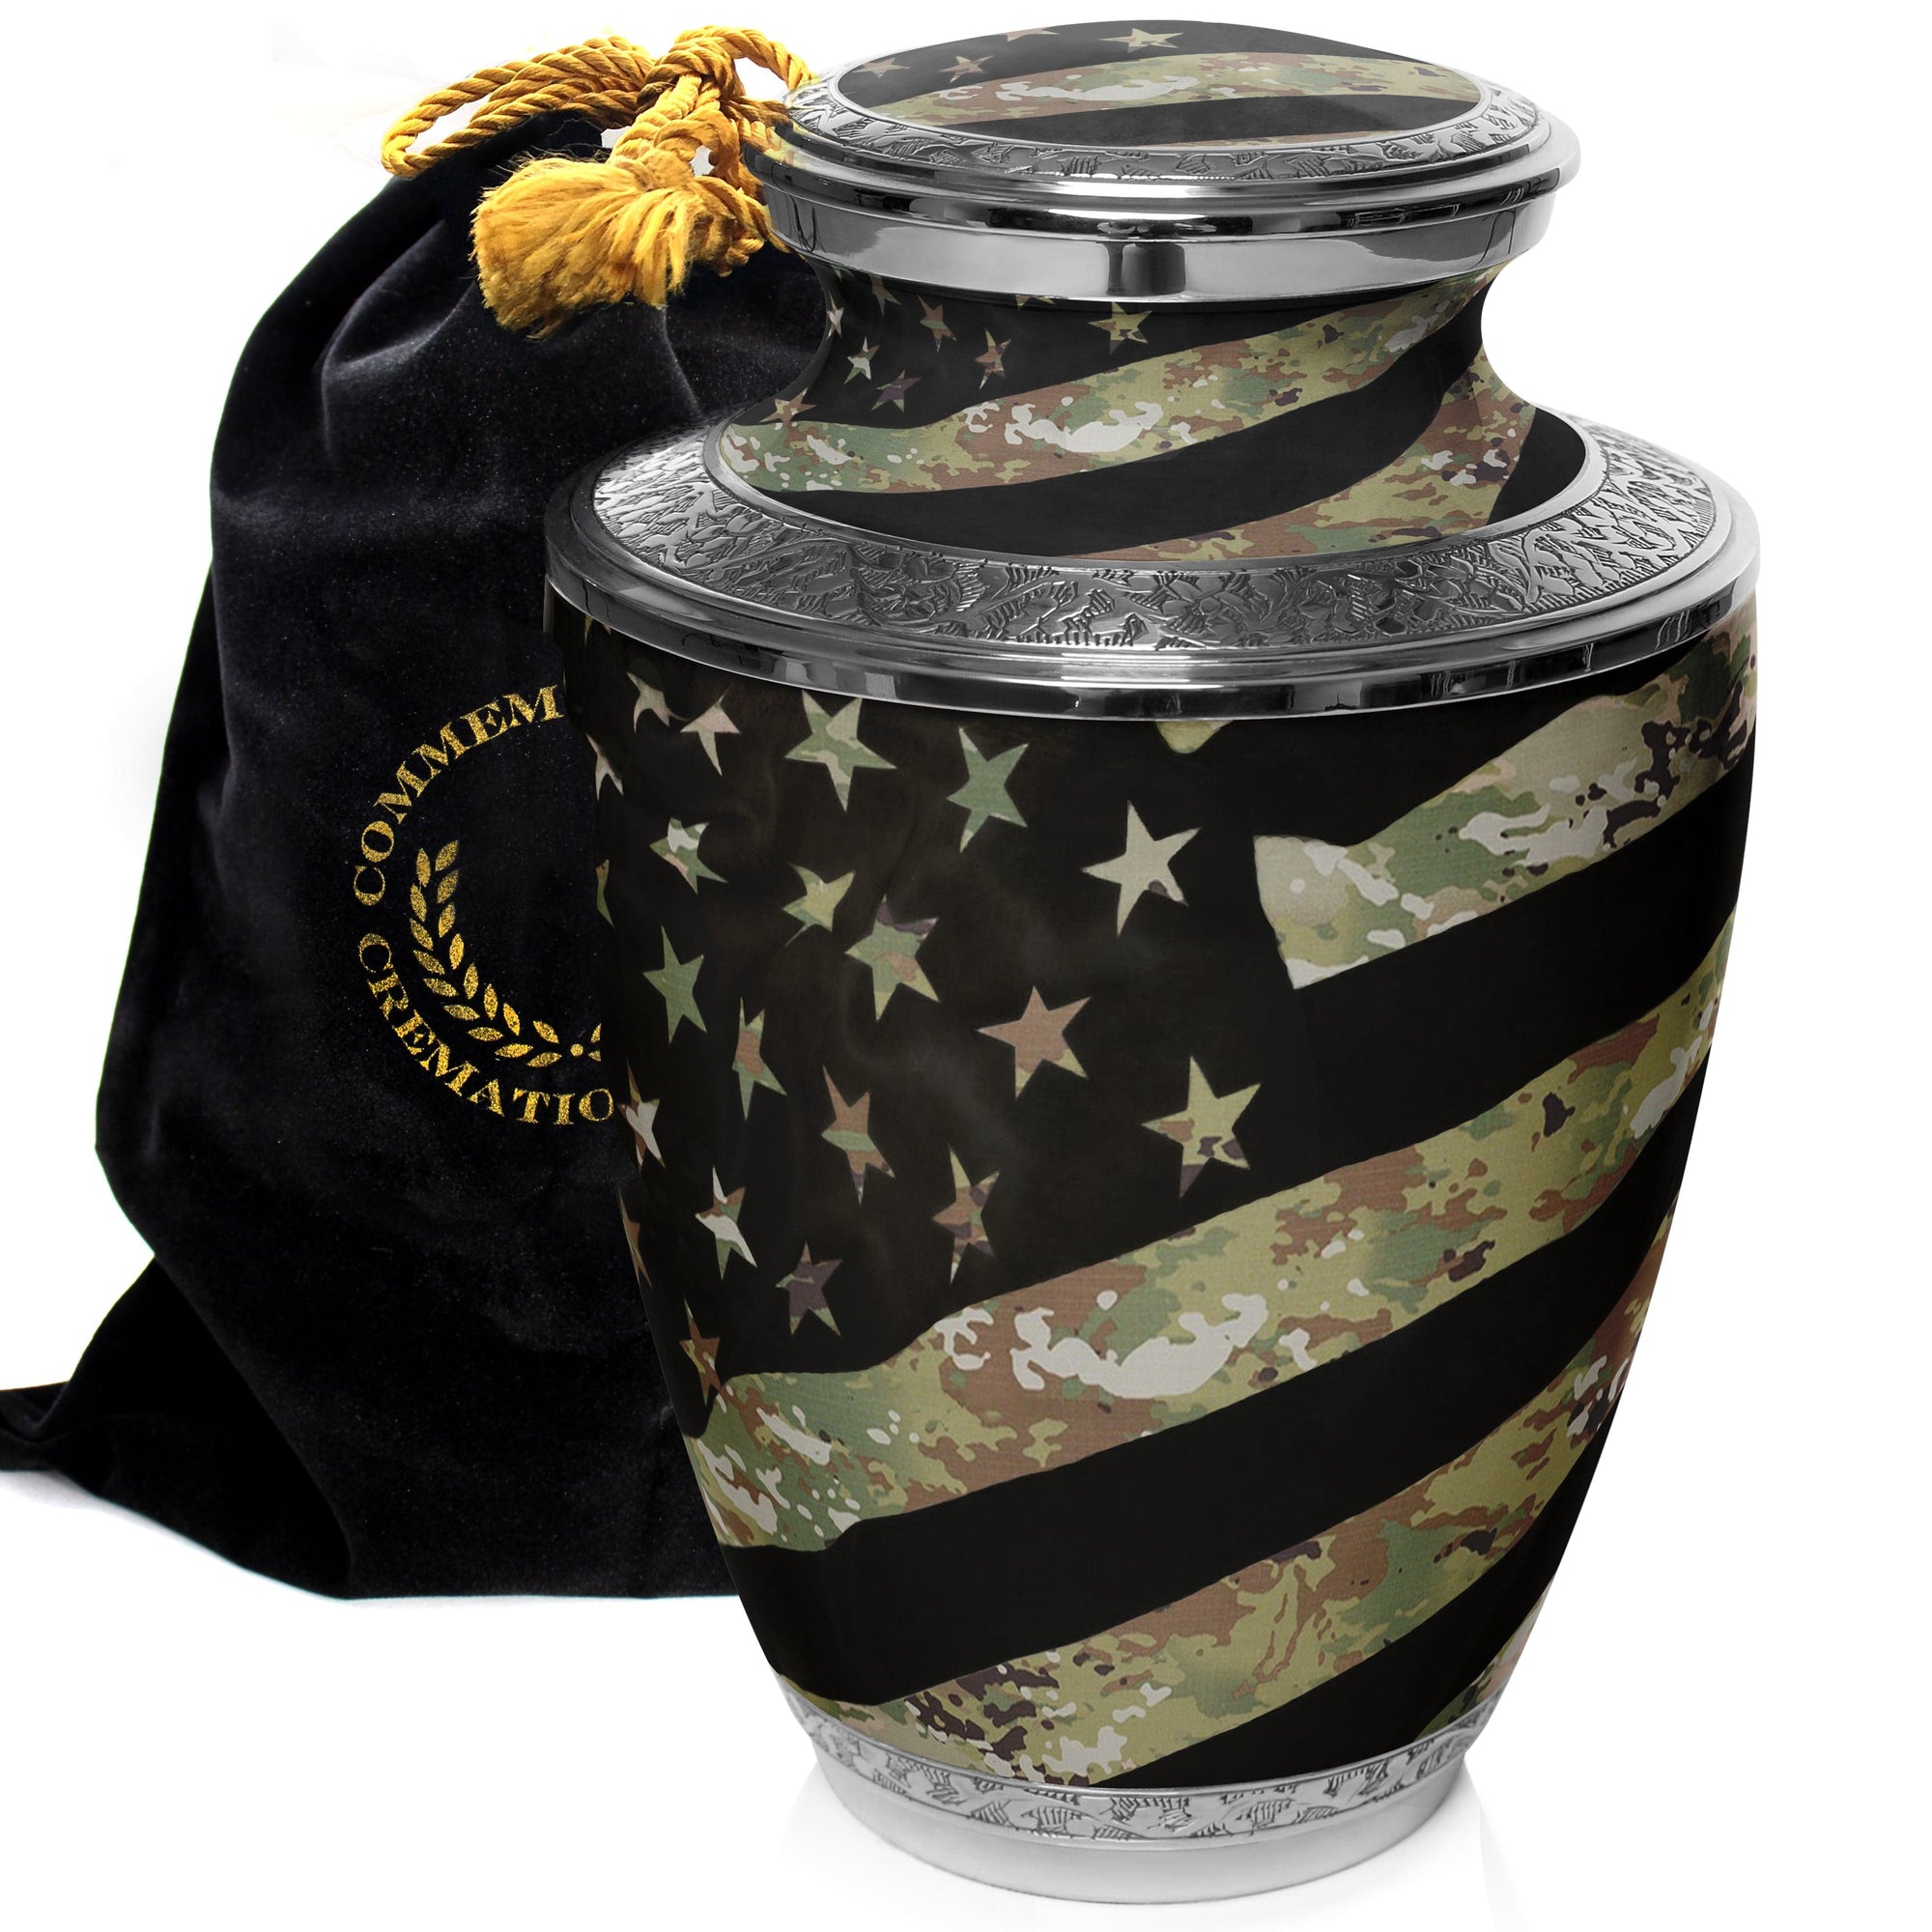 Commemorative Cremation Urns Home & Garden Army OCP Flag Military Cremation Urn